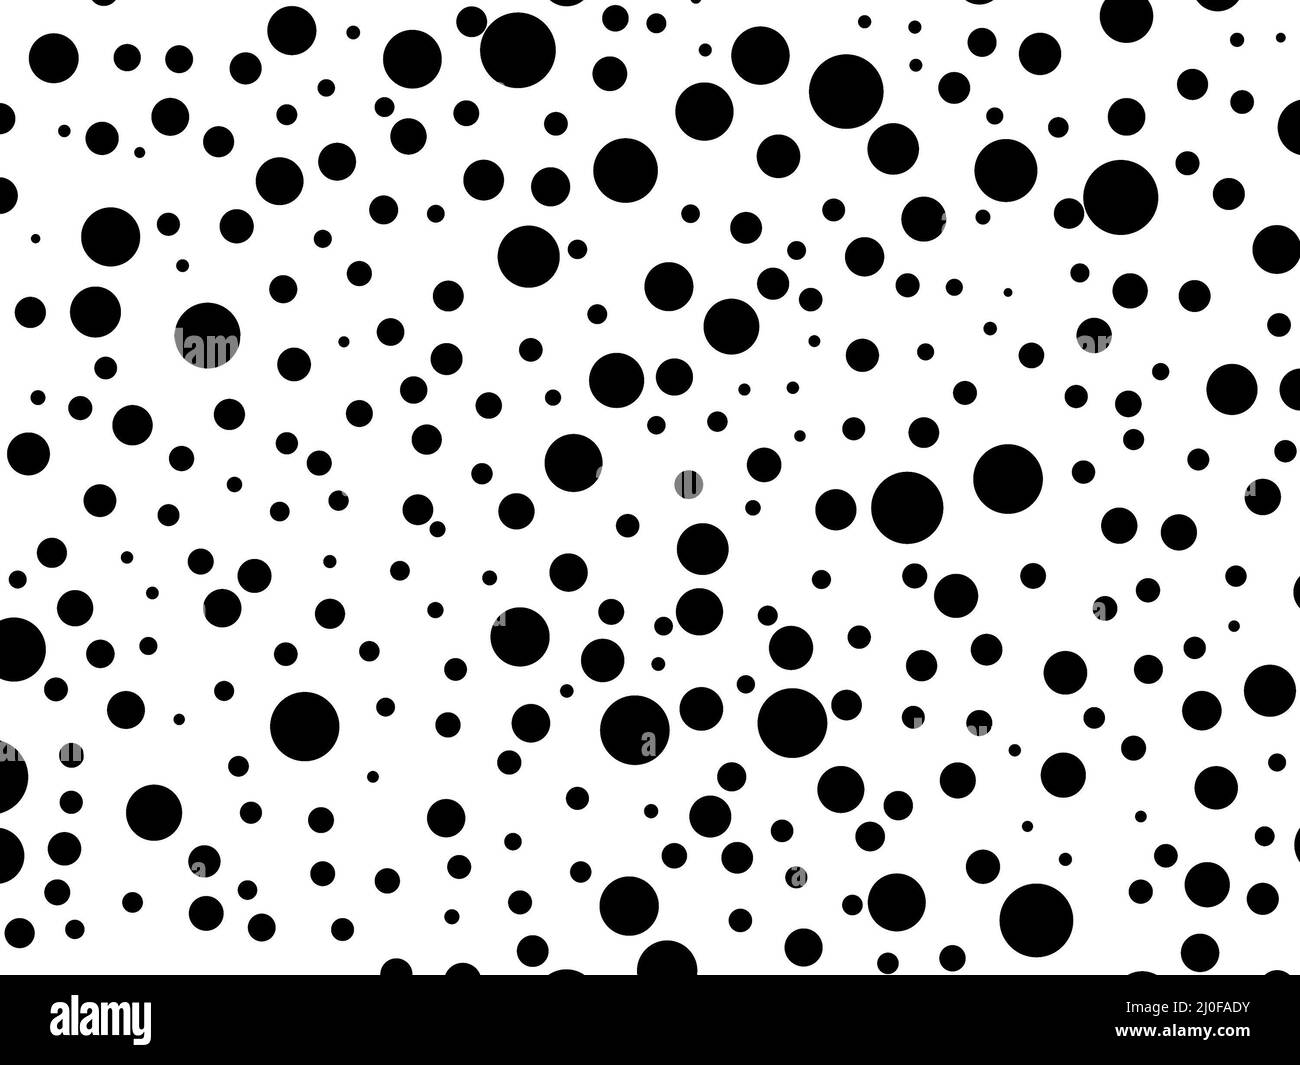 Black circles of different sizes on a white background. 3D rendering Stock Photo